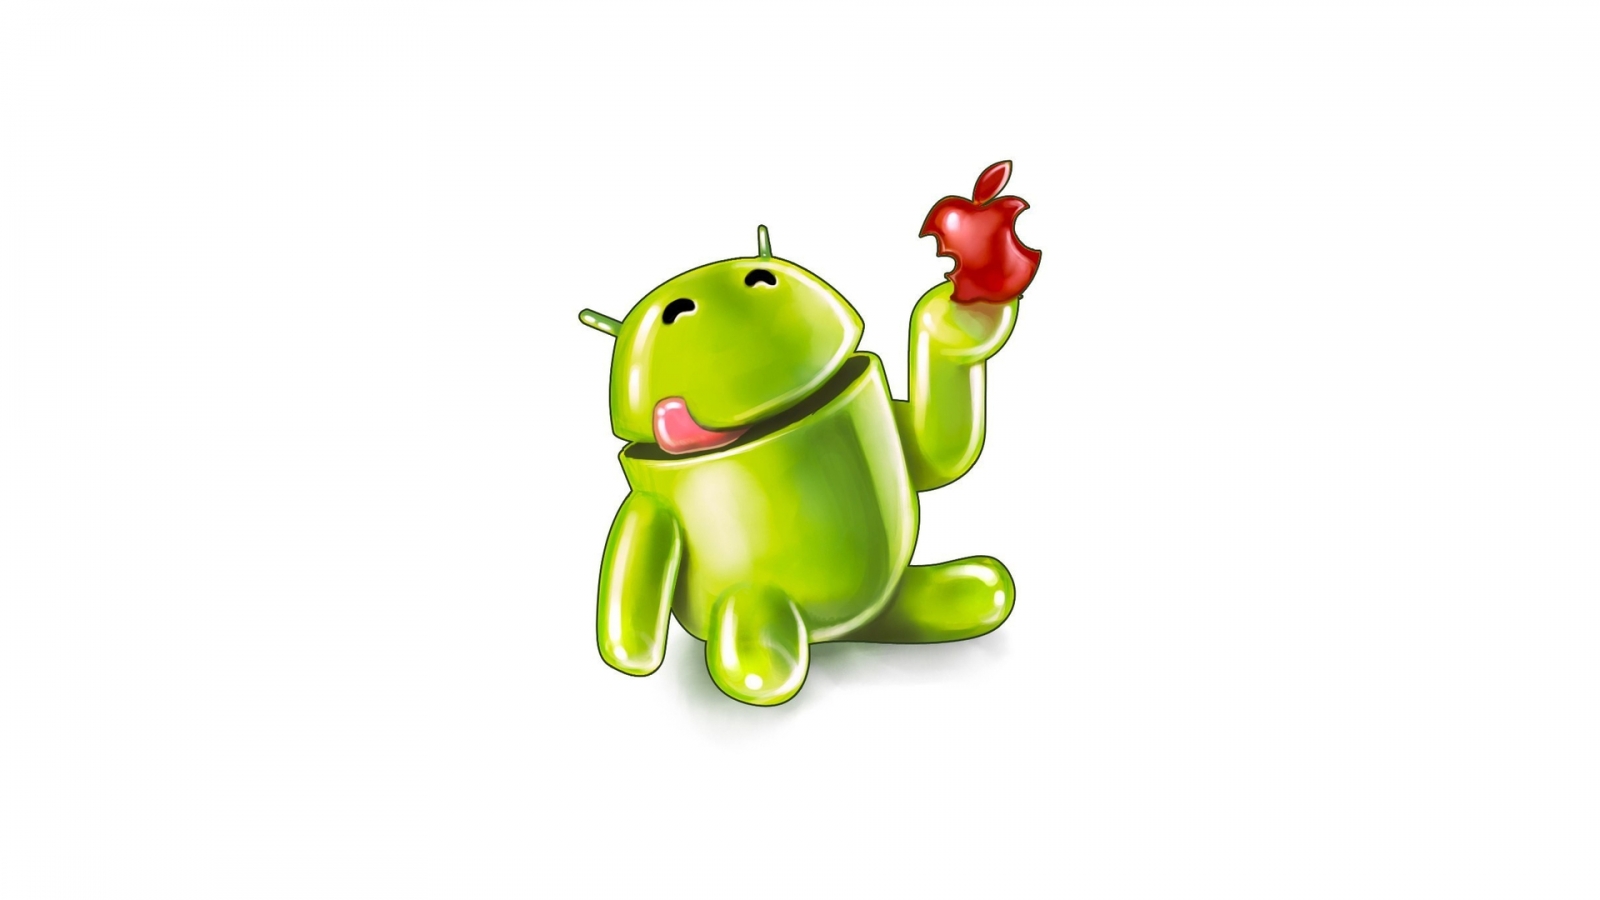 Android Eating Apple for 1600 x 900 HDTV resolution